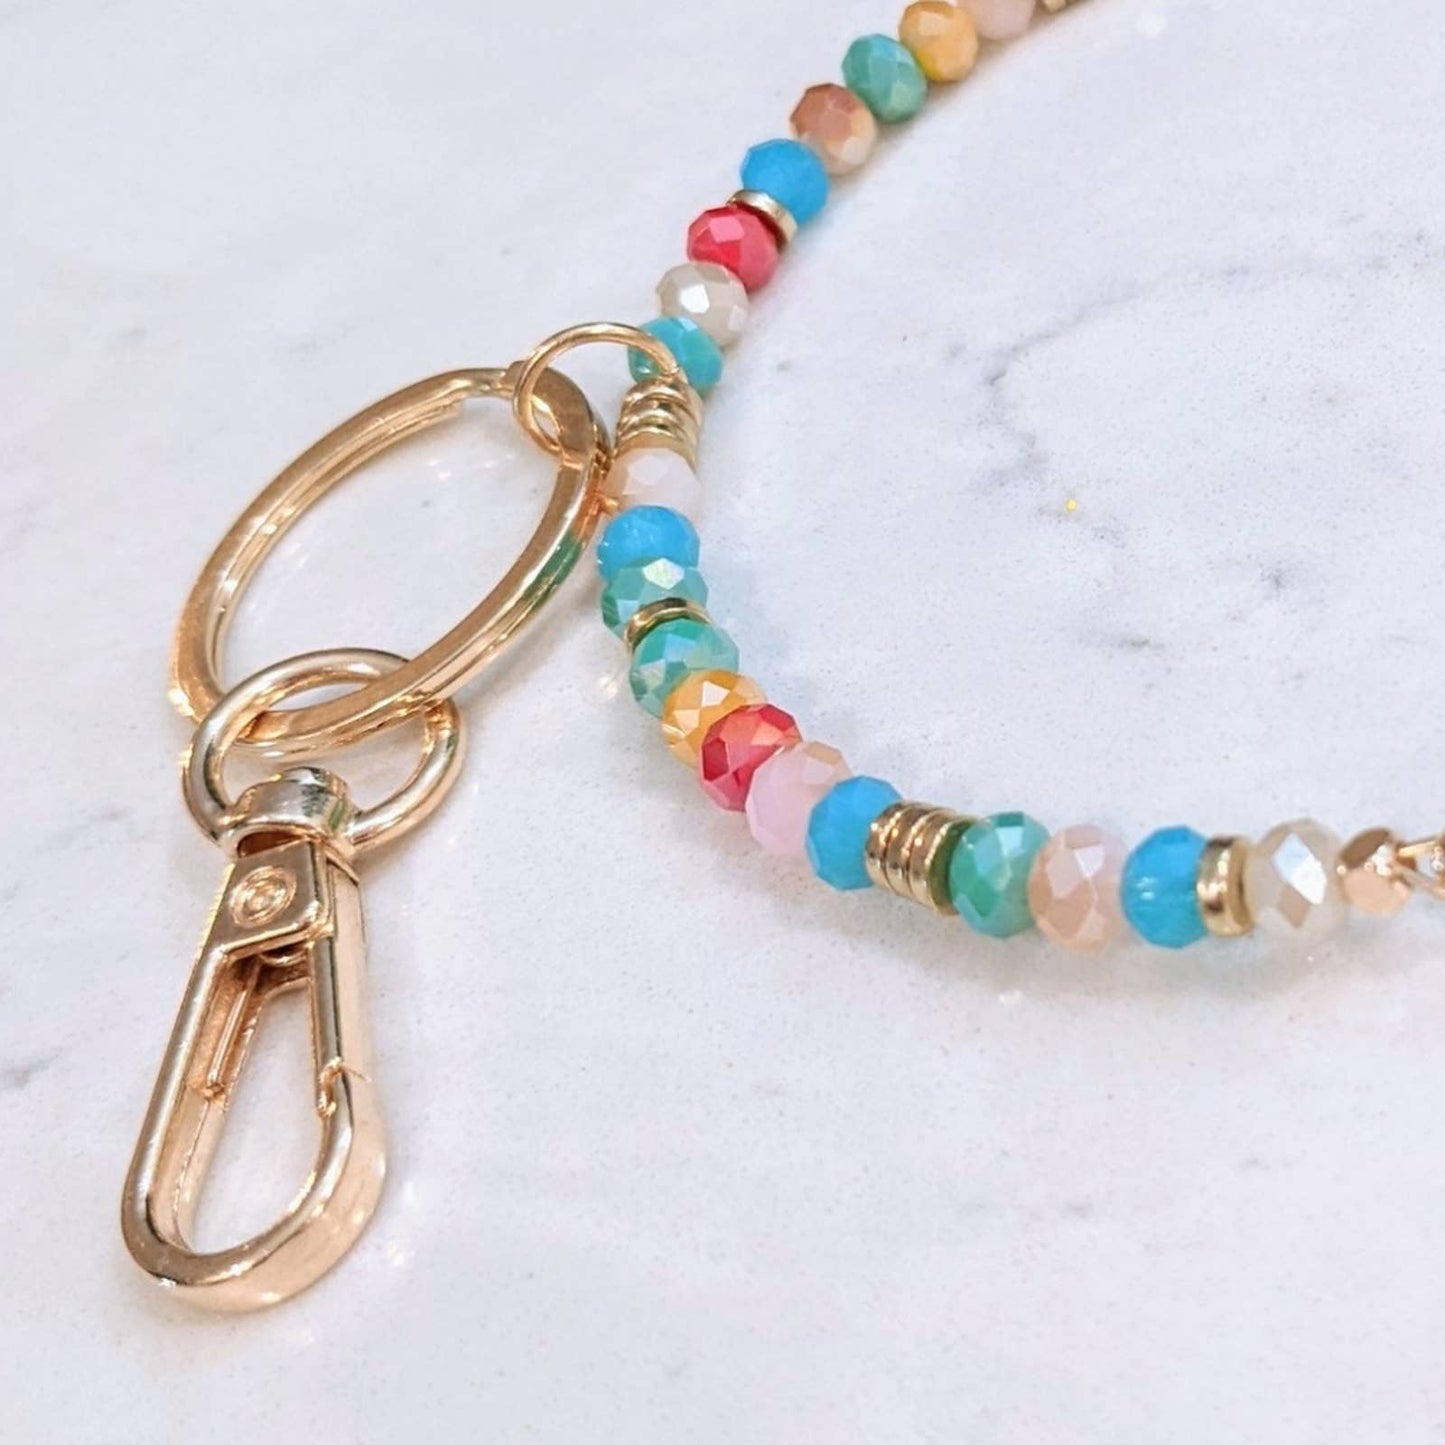 GOLD TONE CROSS Glass Bead Bracelet Style Hoop Key Chain with Closed Hook